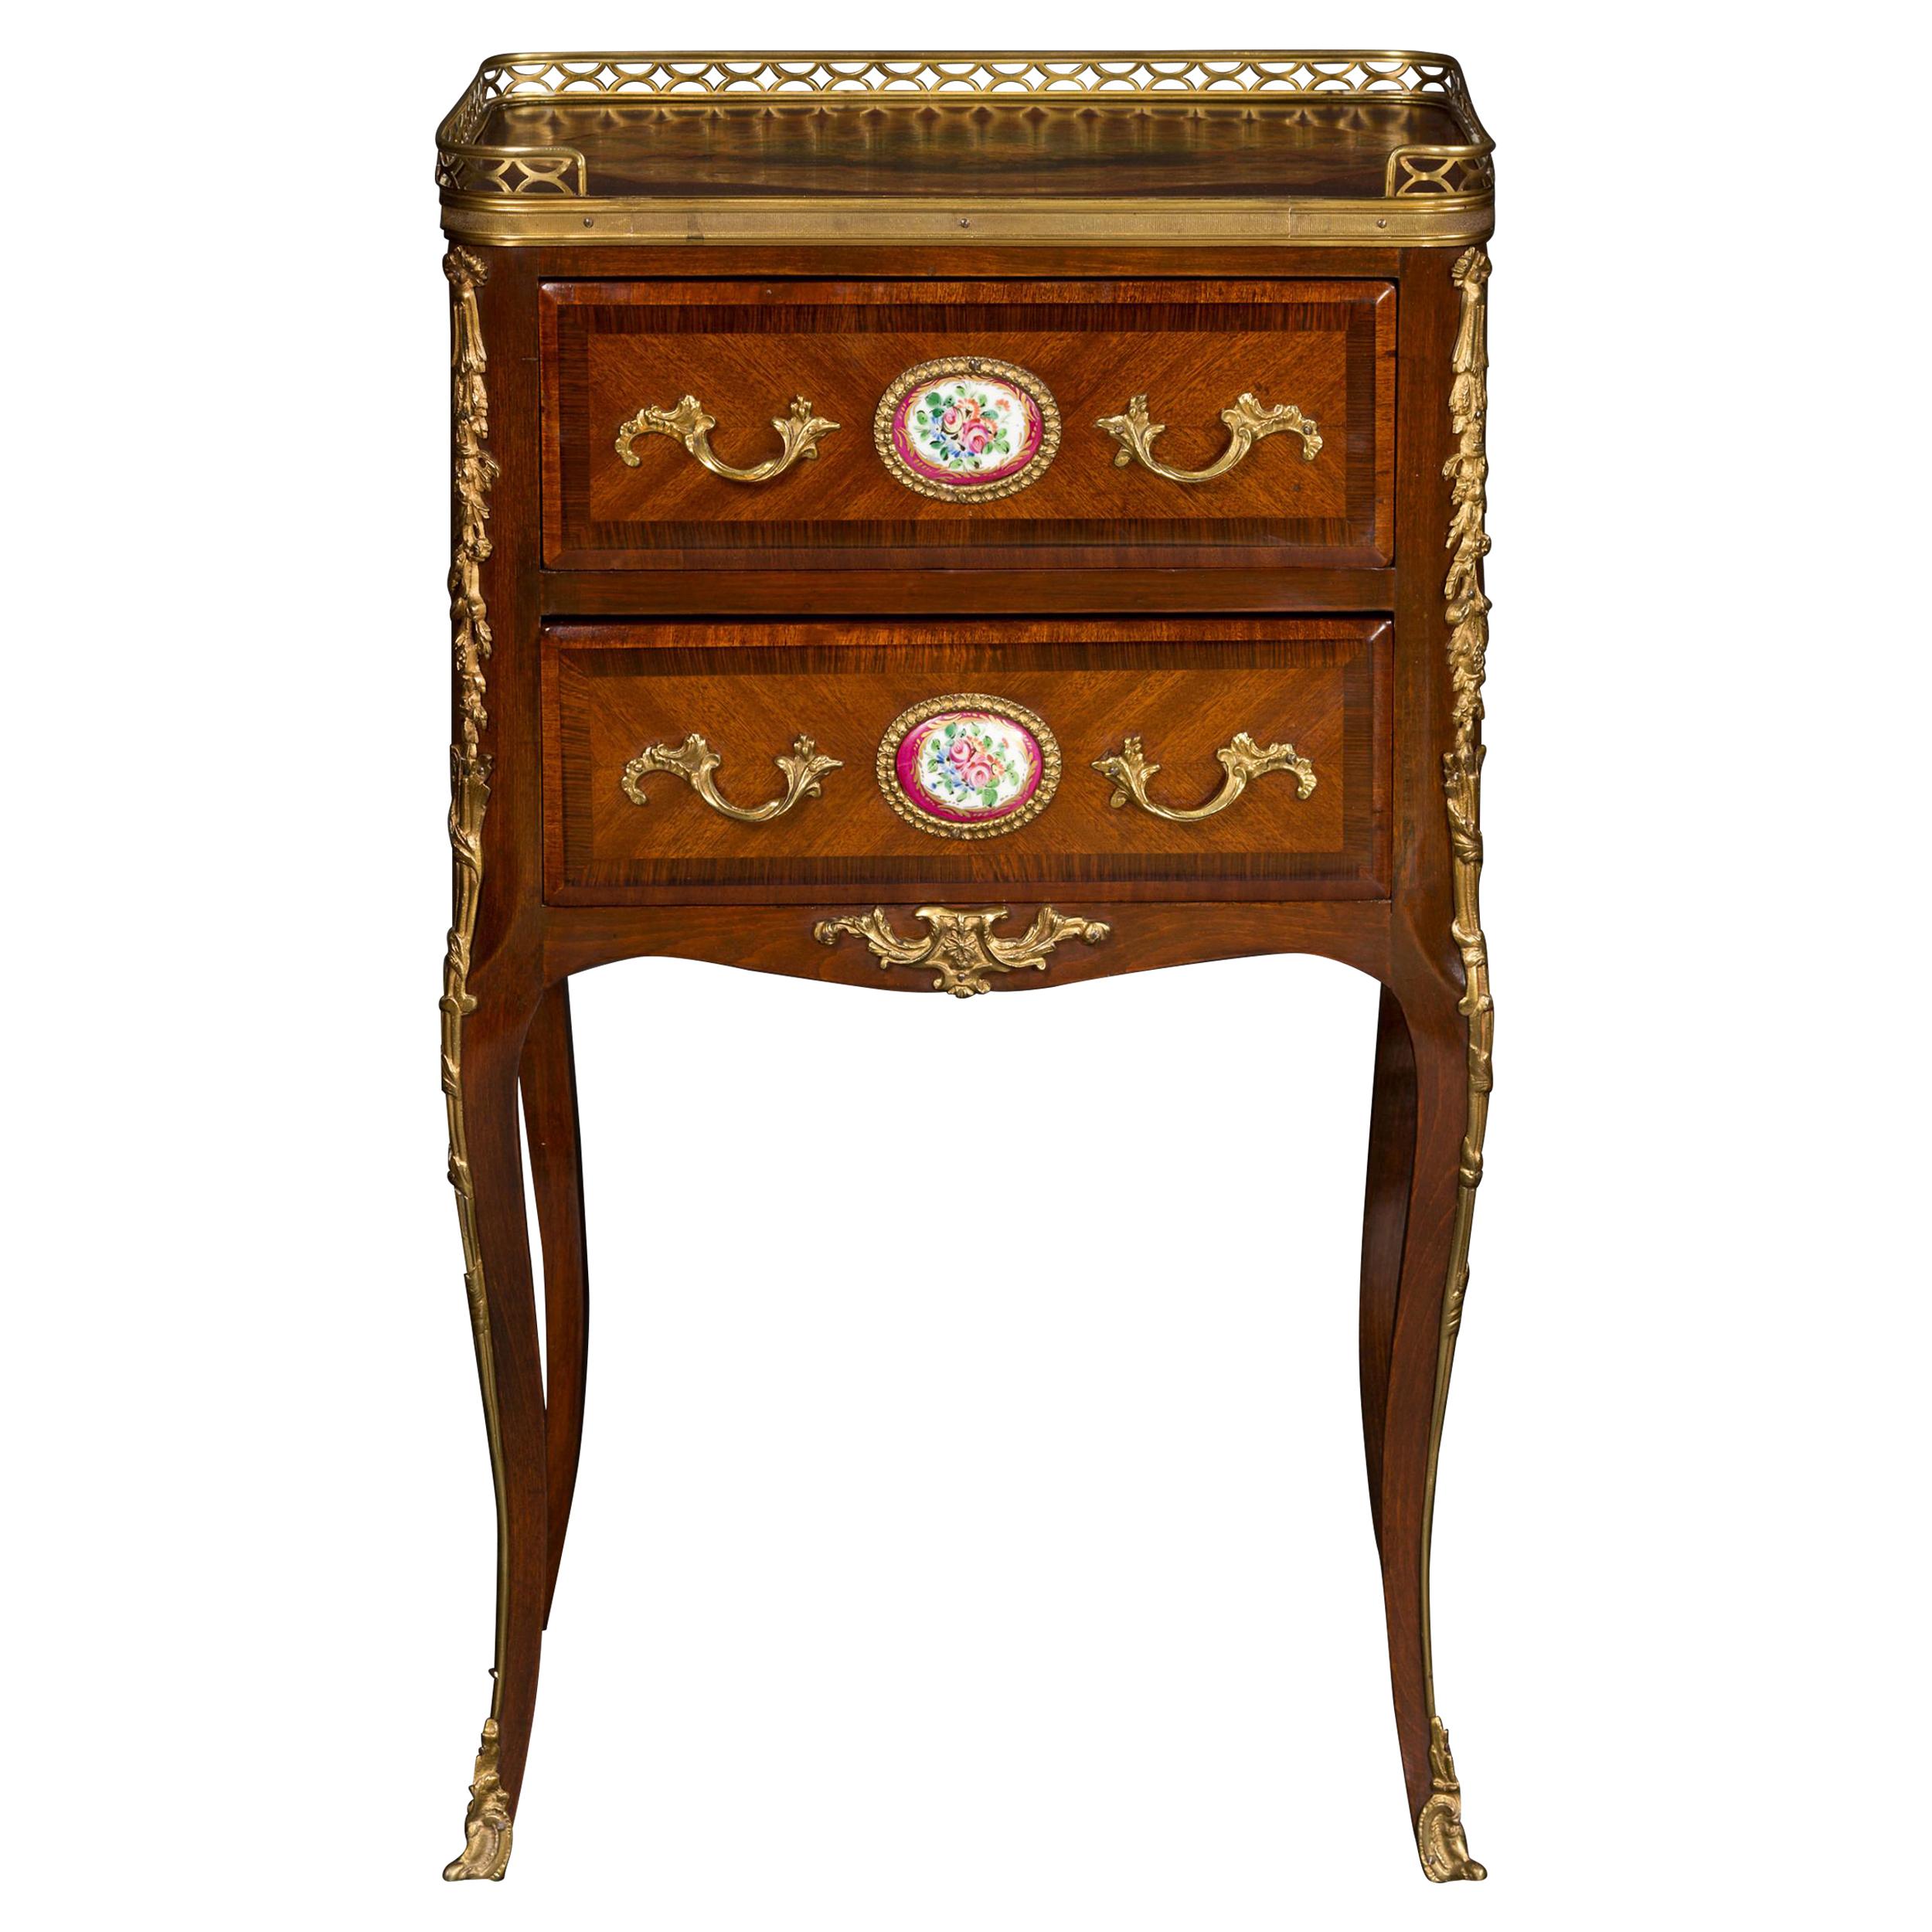 French Mahogany Inlaid Table with Drawers